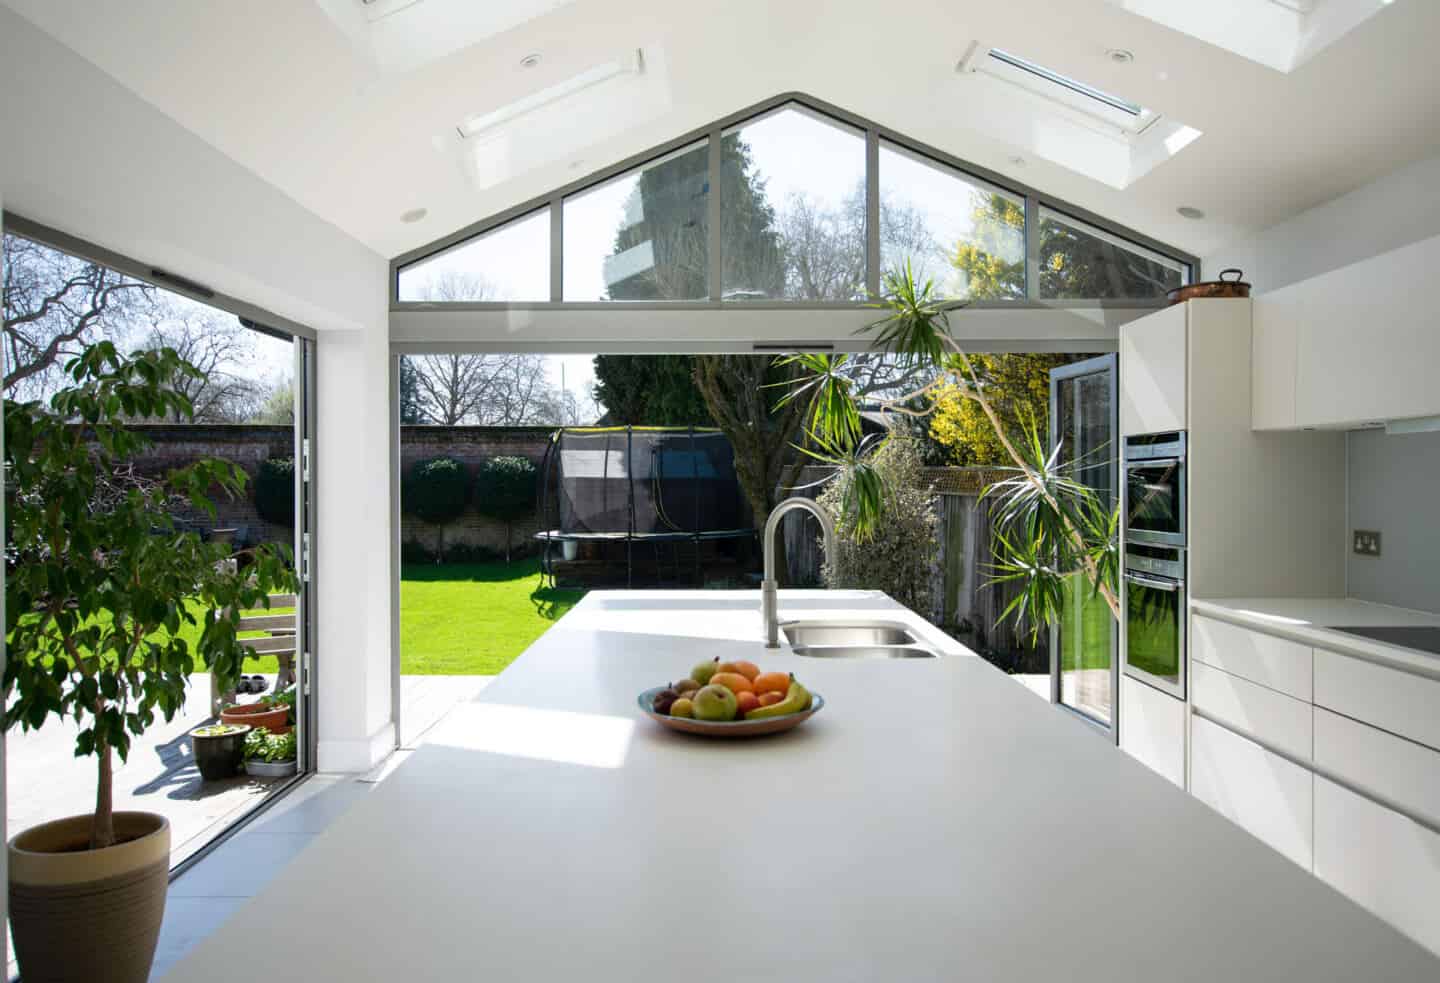 A modern white kitchen with large glass doors leading out to the garden increases natural light at home